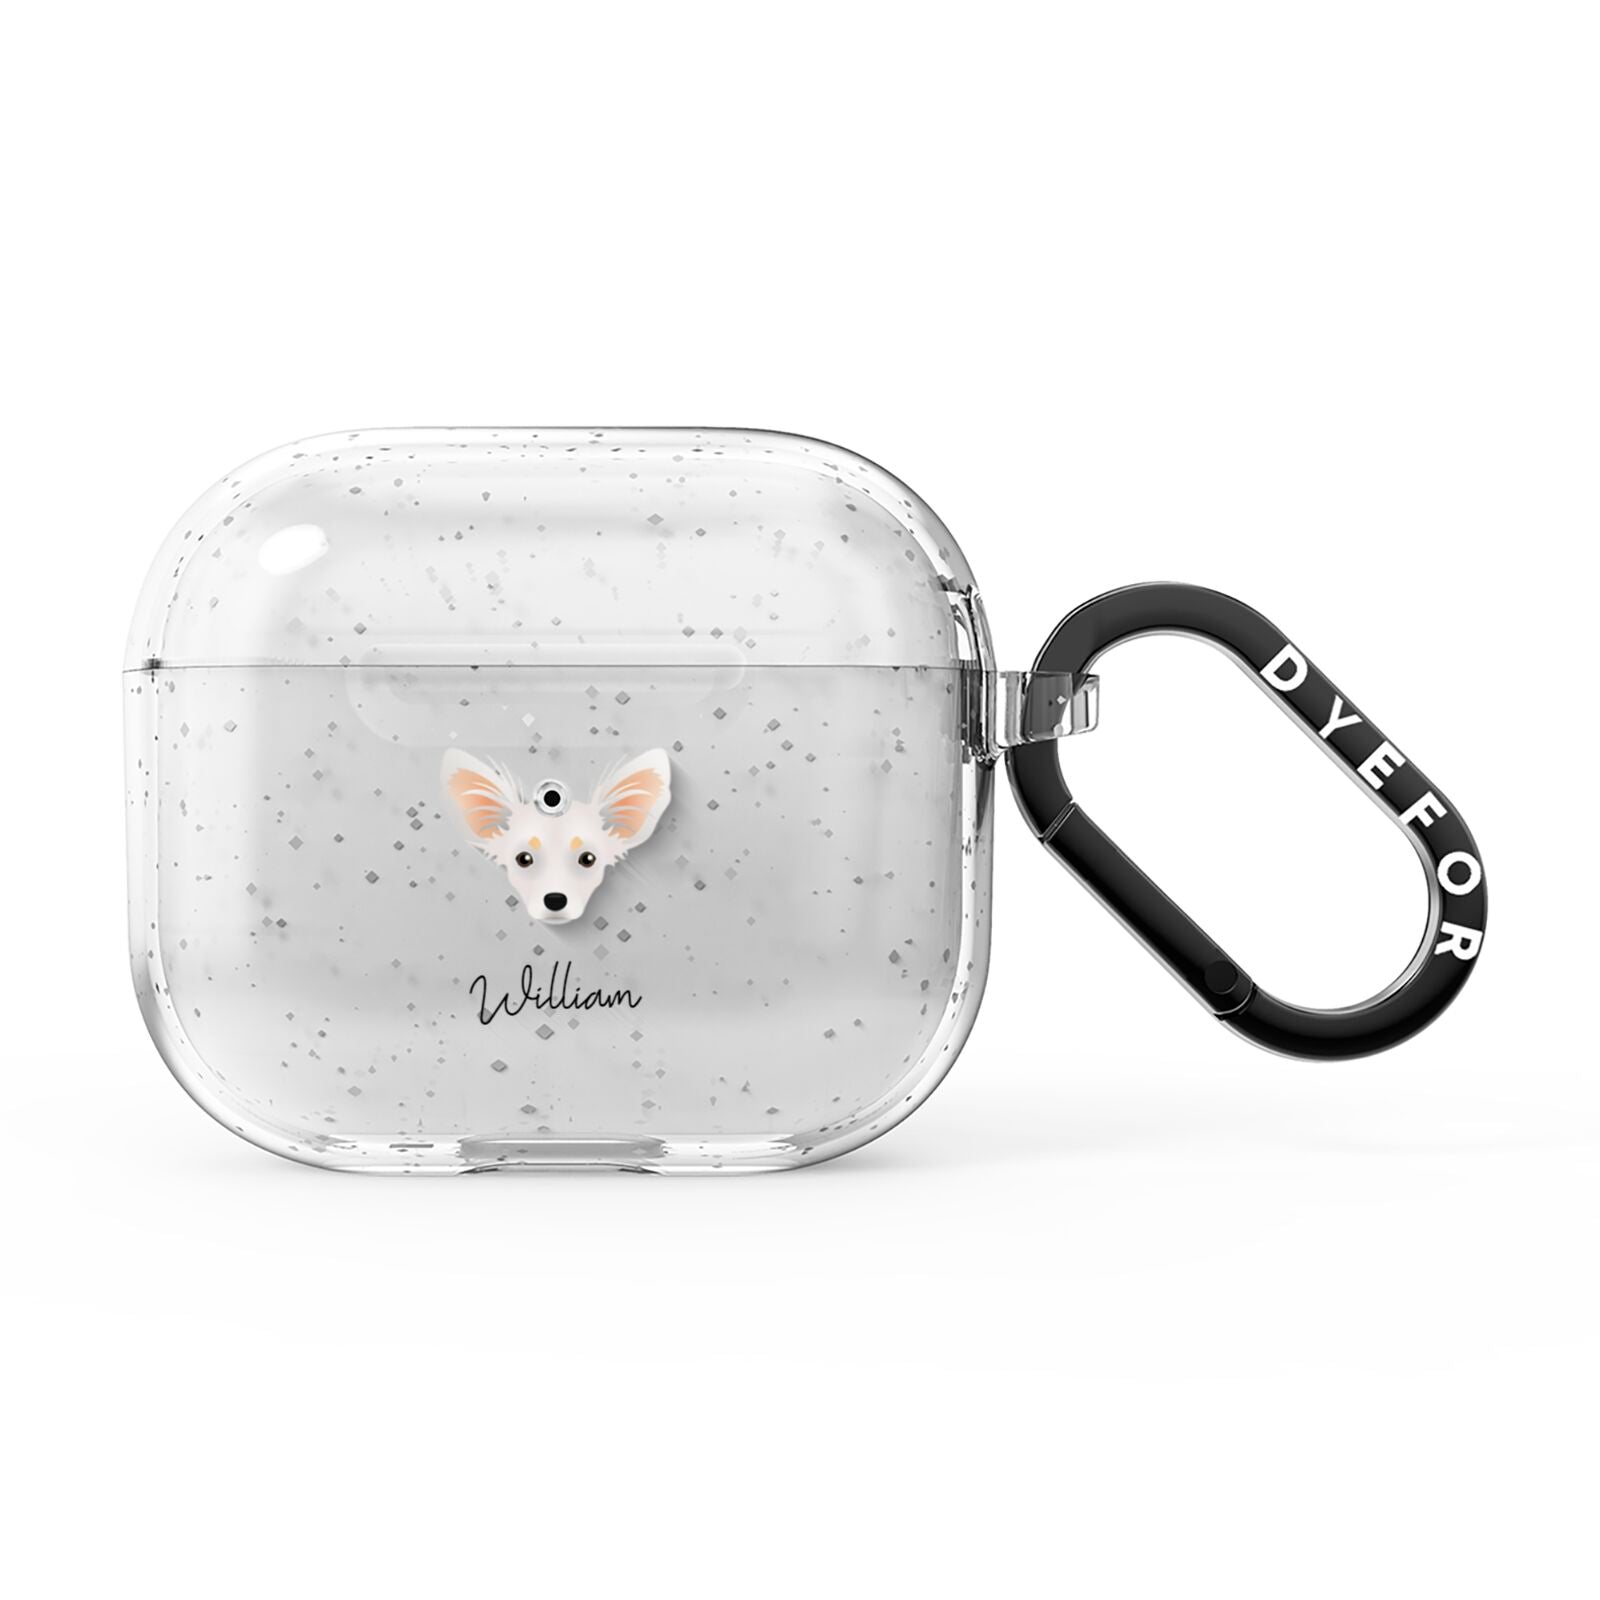 Russian Toy Personalised AirPods Glitter Case 3rd Gen